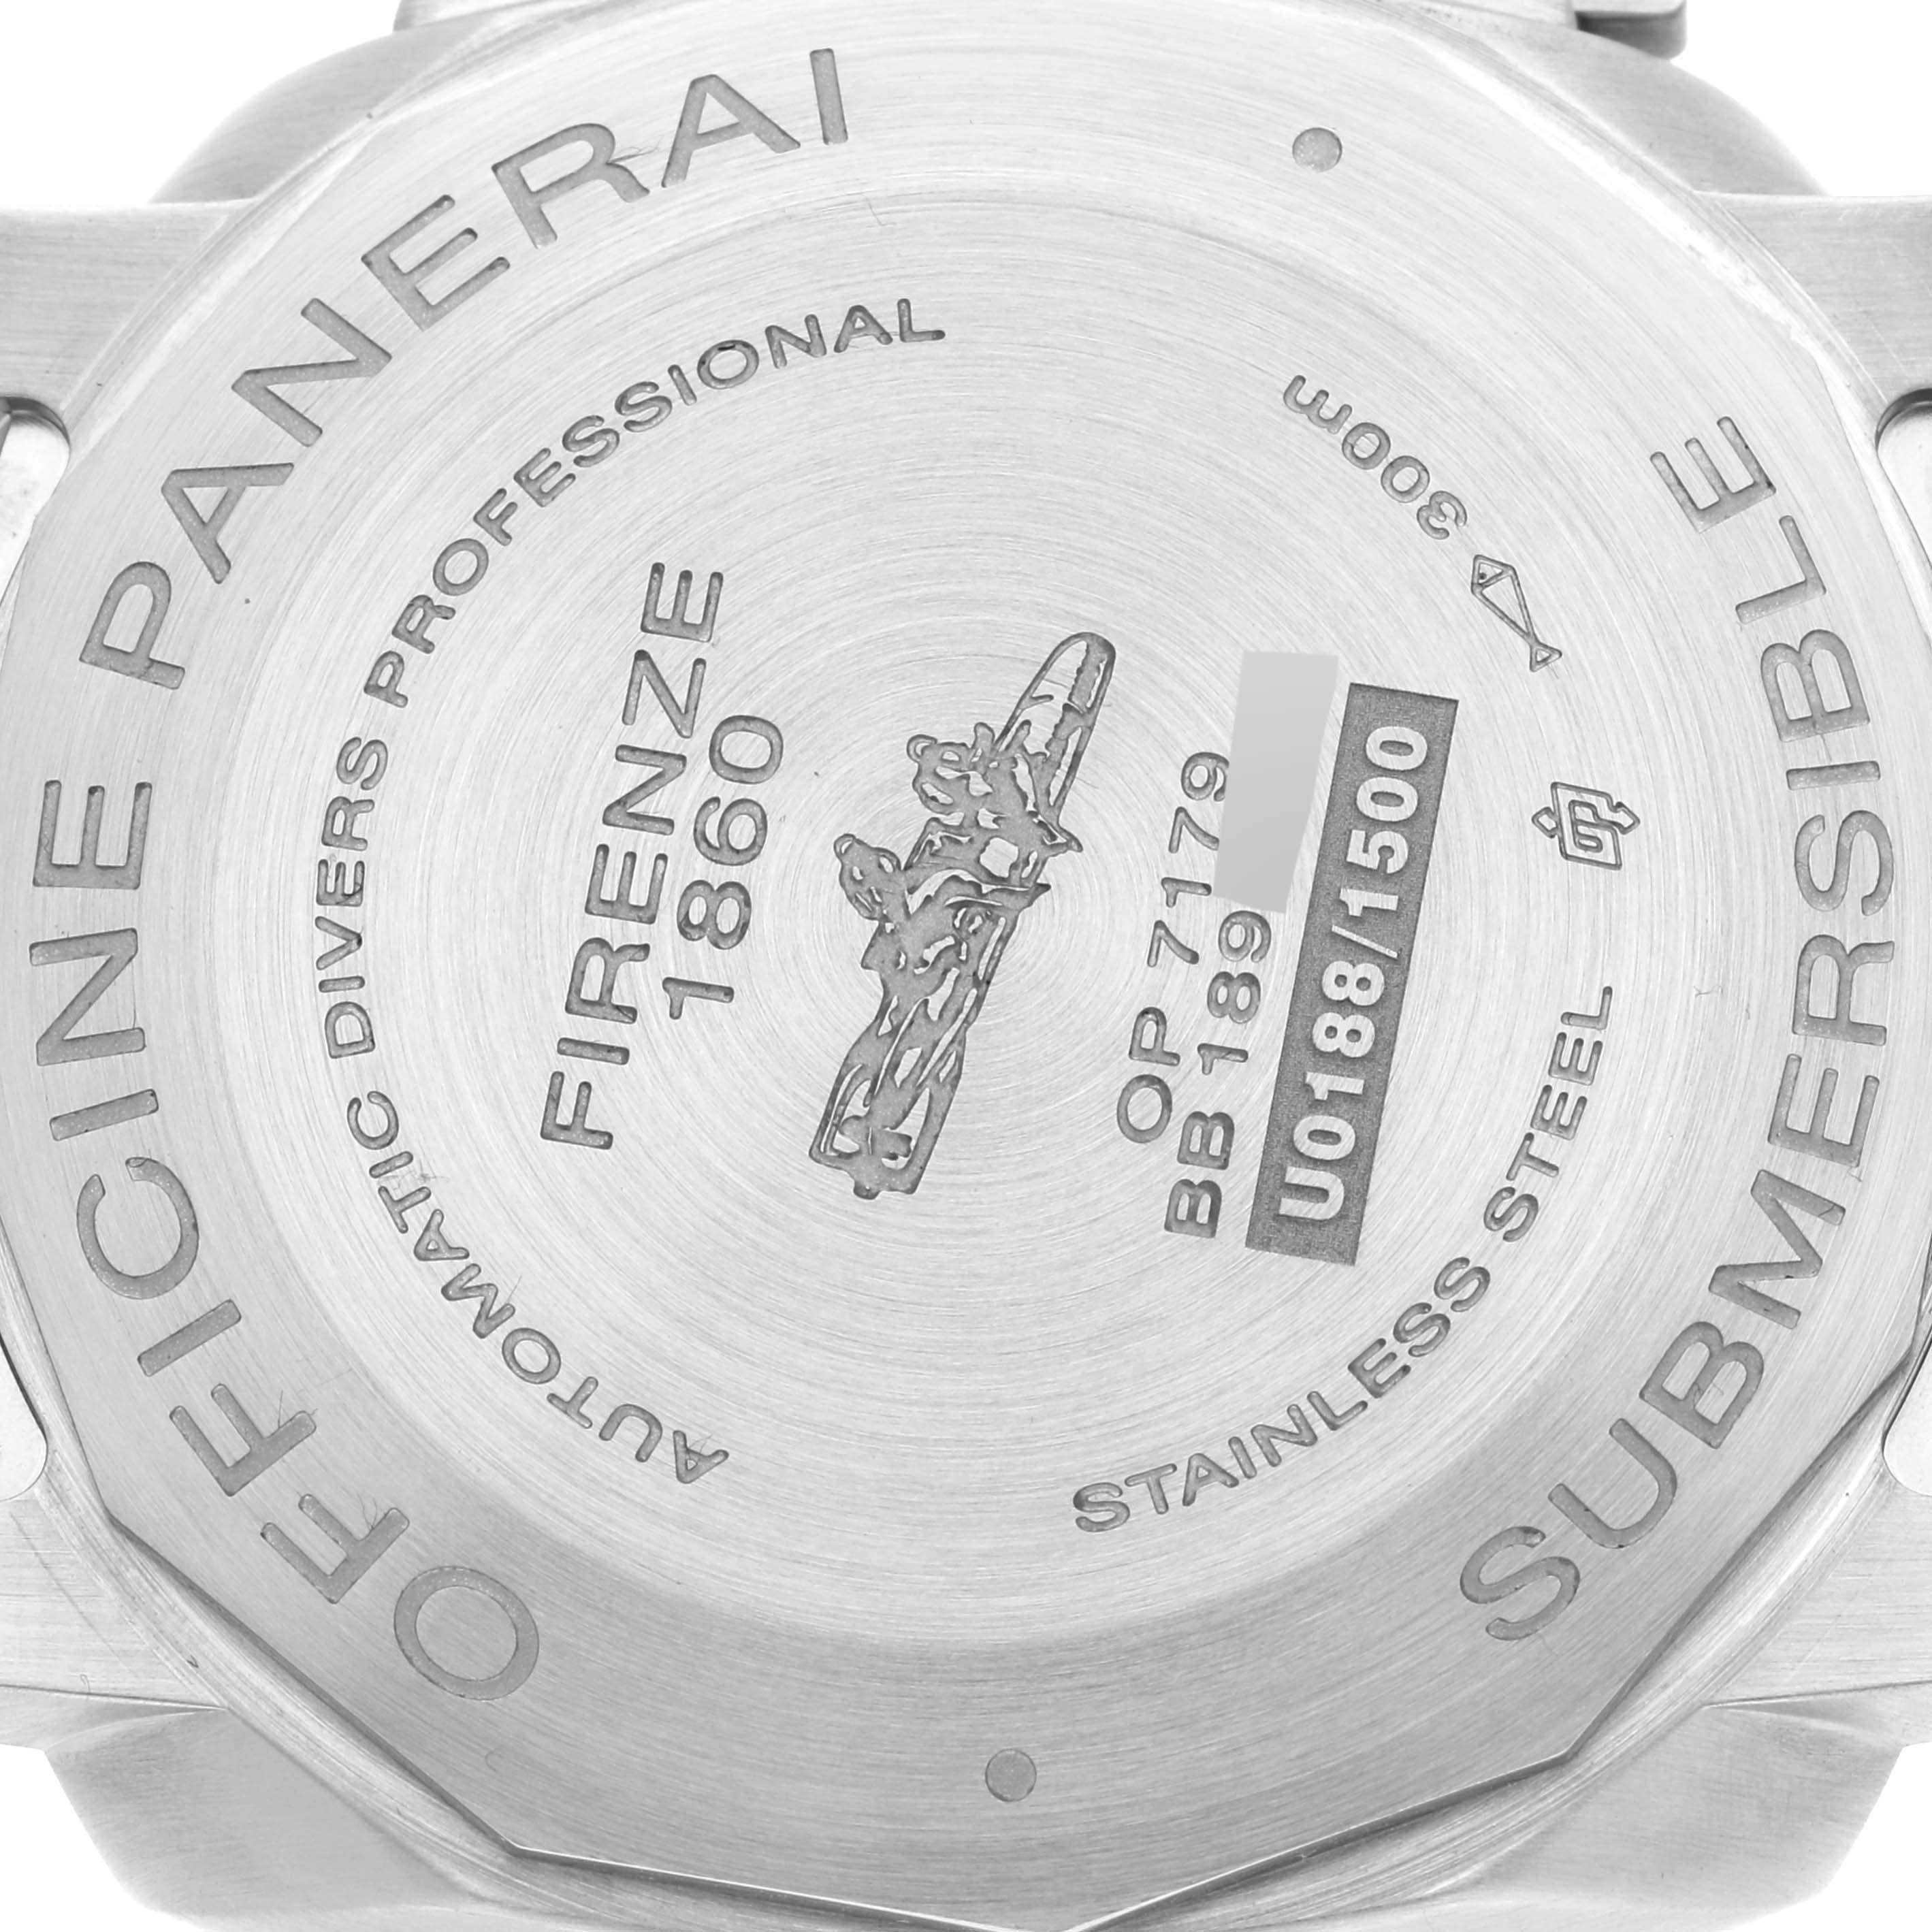 Panerai Luminor Submersible 42mm Steel Mens Watch PAM00682 Box Papers For Sale 4